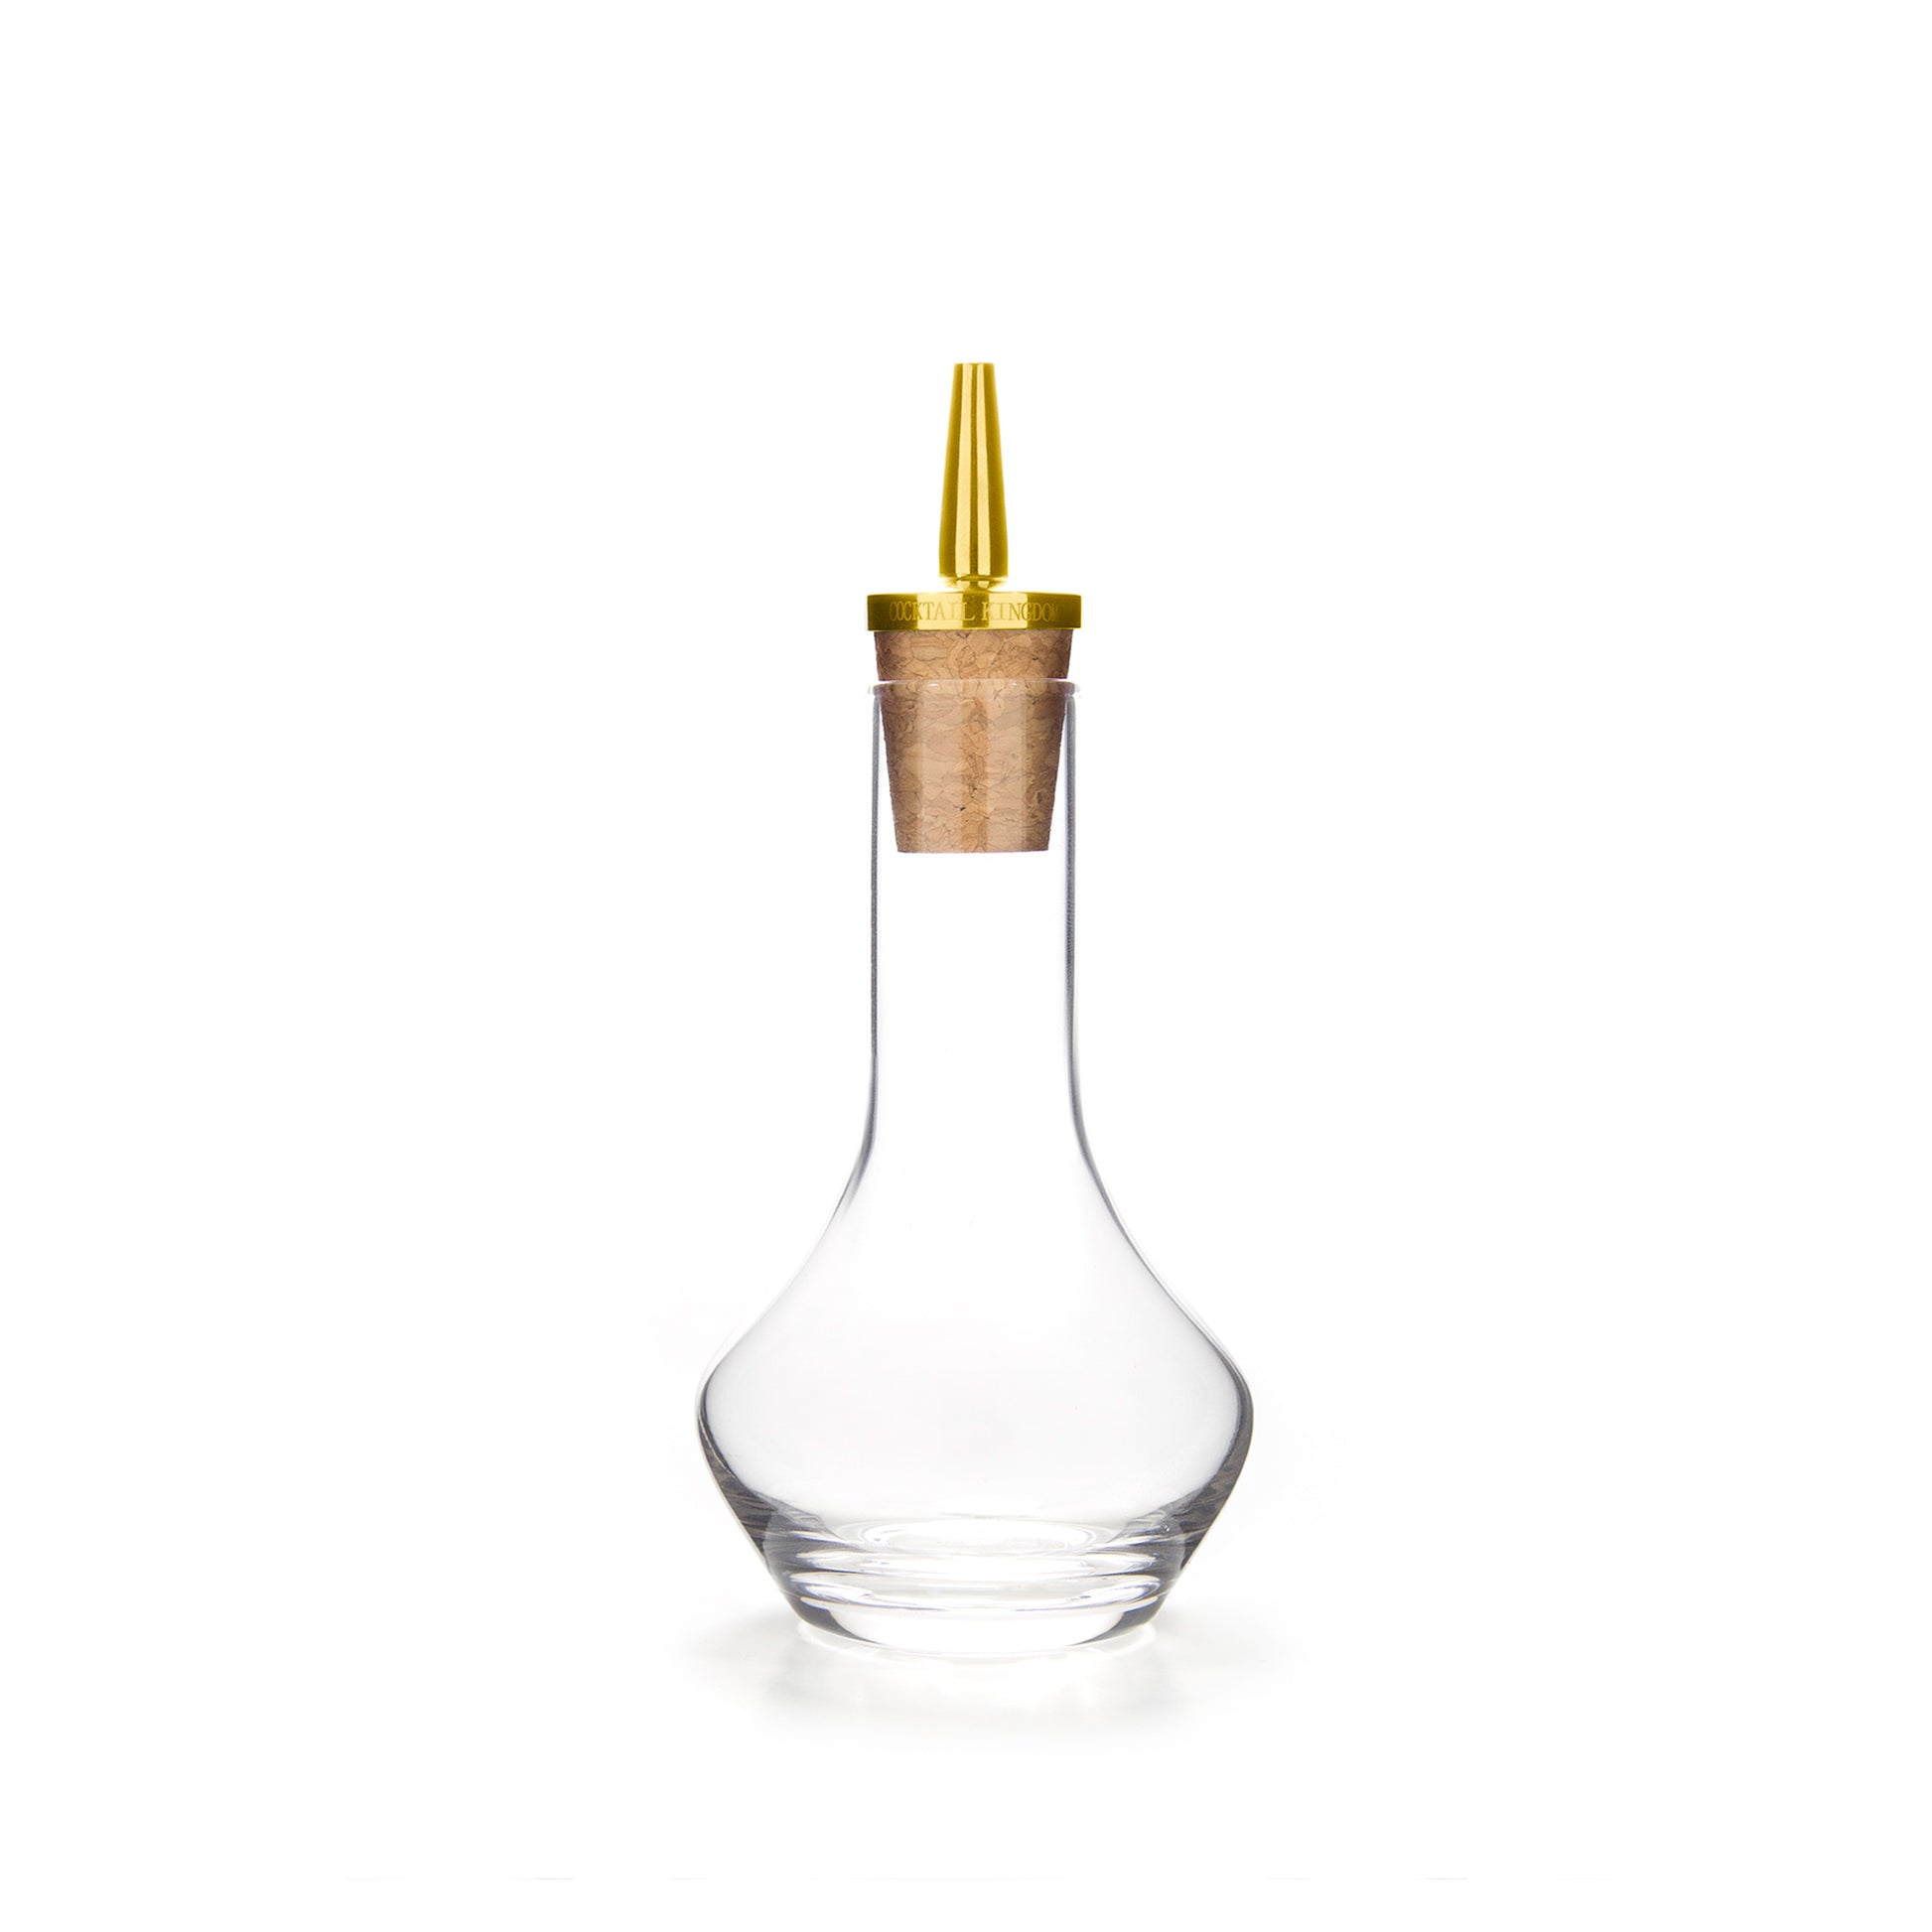 BITTERS BOTTLE – GOLD-PLATED DASHER TOP / 50ml (1.7oz)